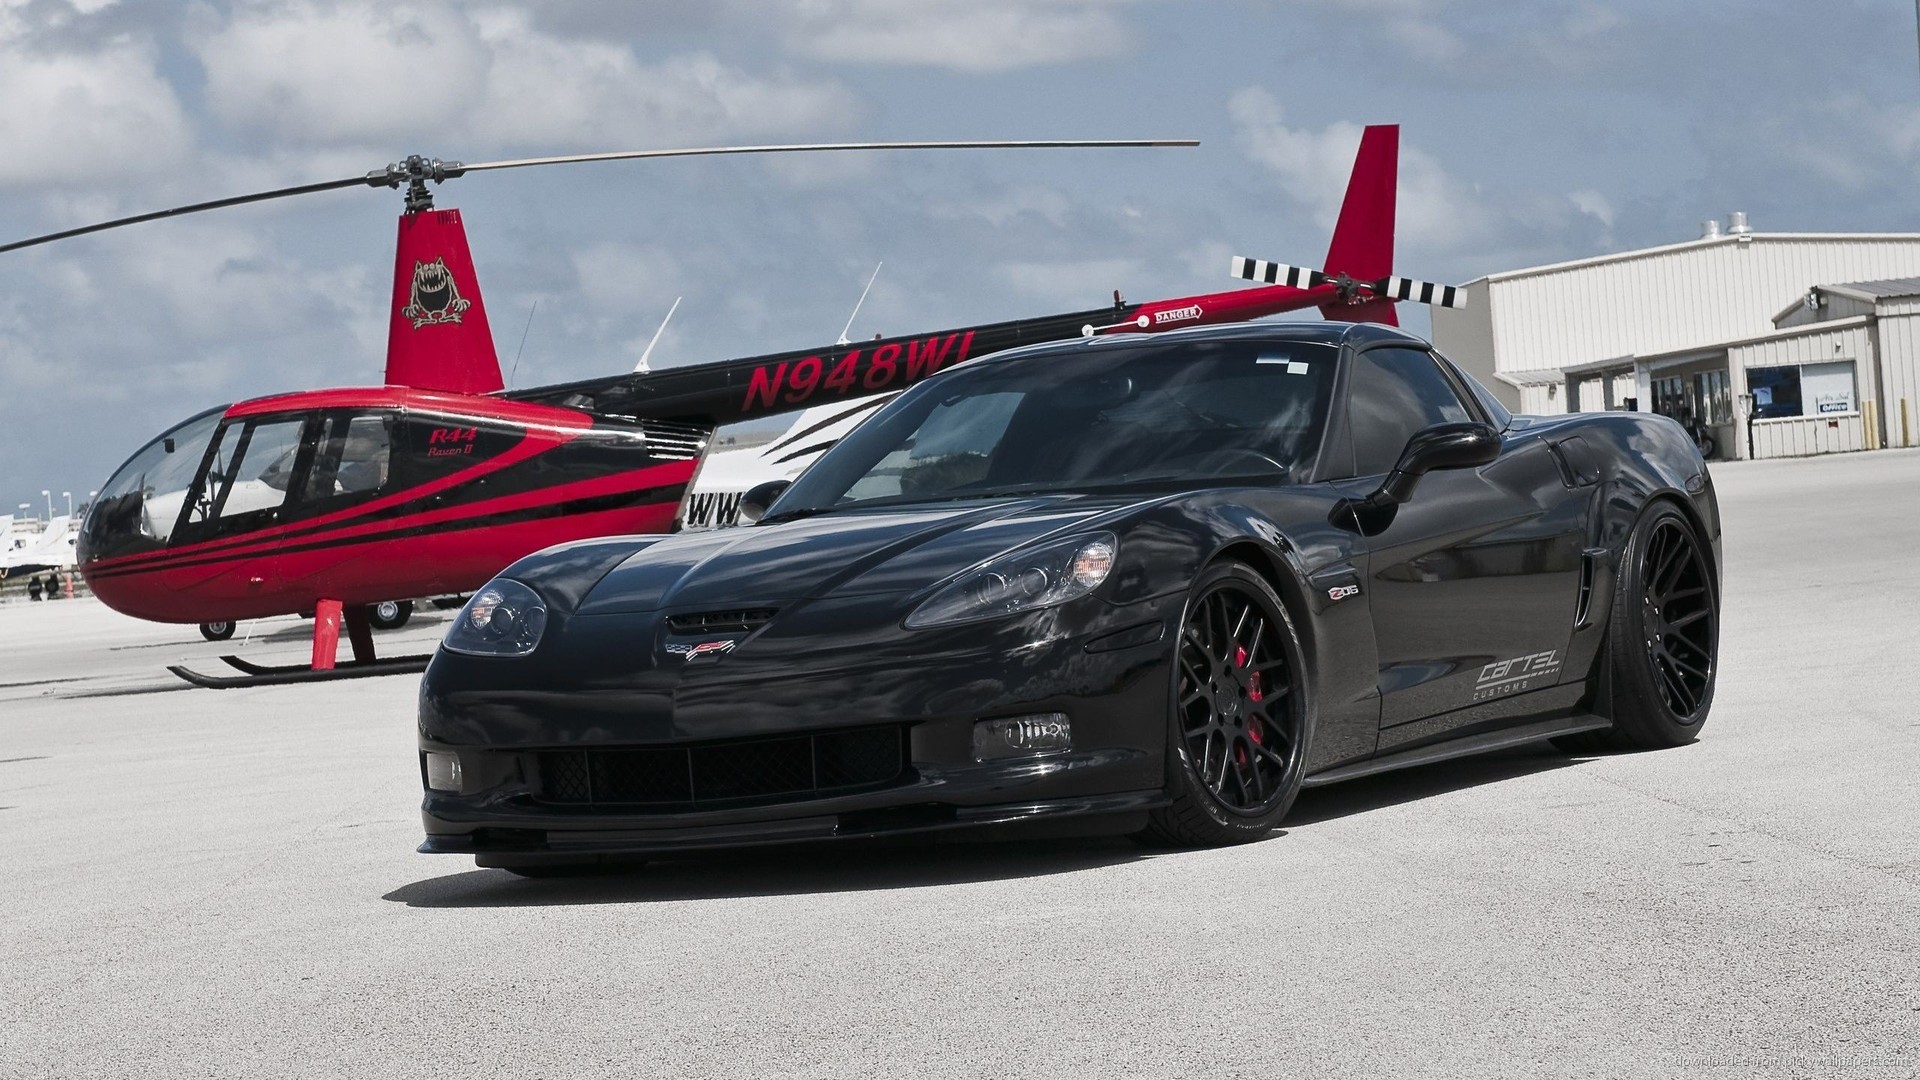 Black Corvette And Helicopter Picture For iPhone Blackberry iPad